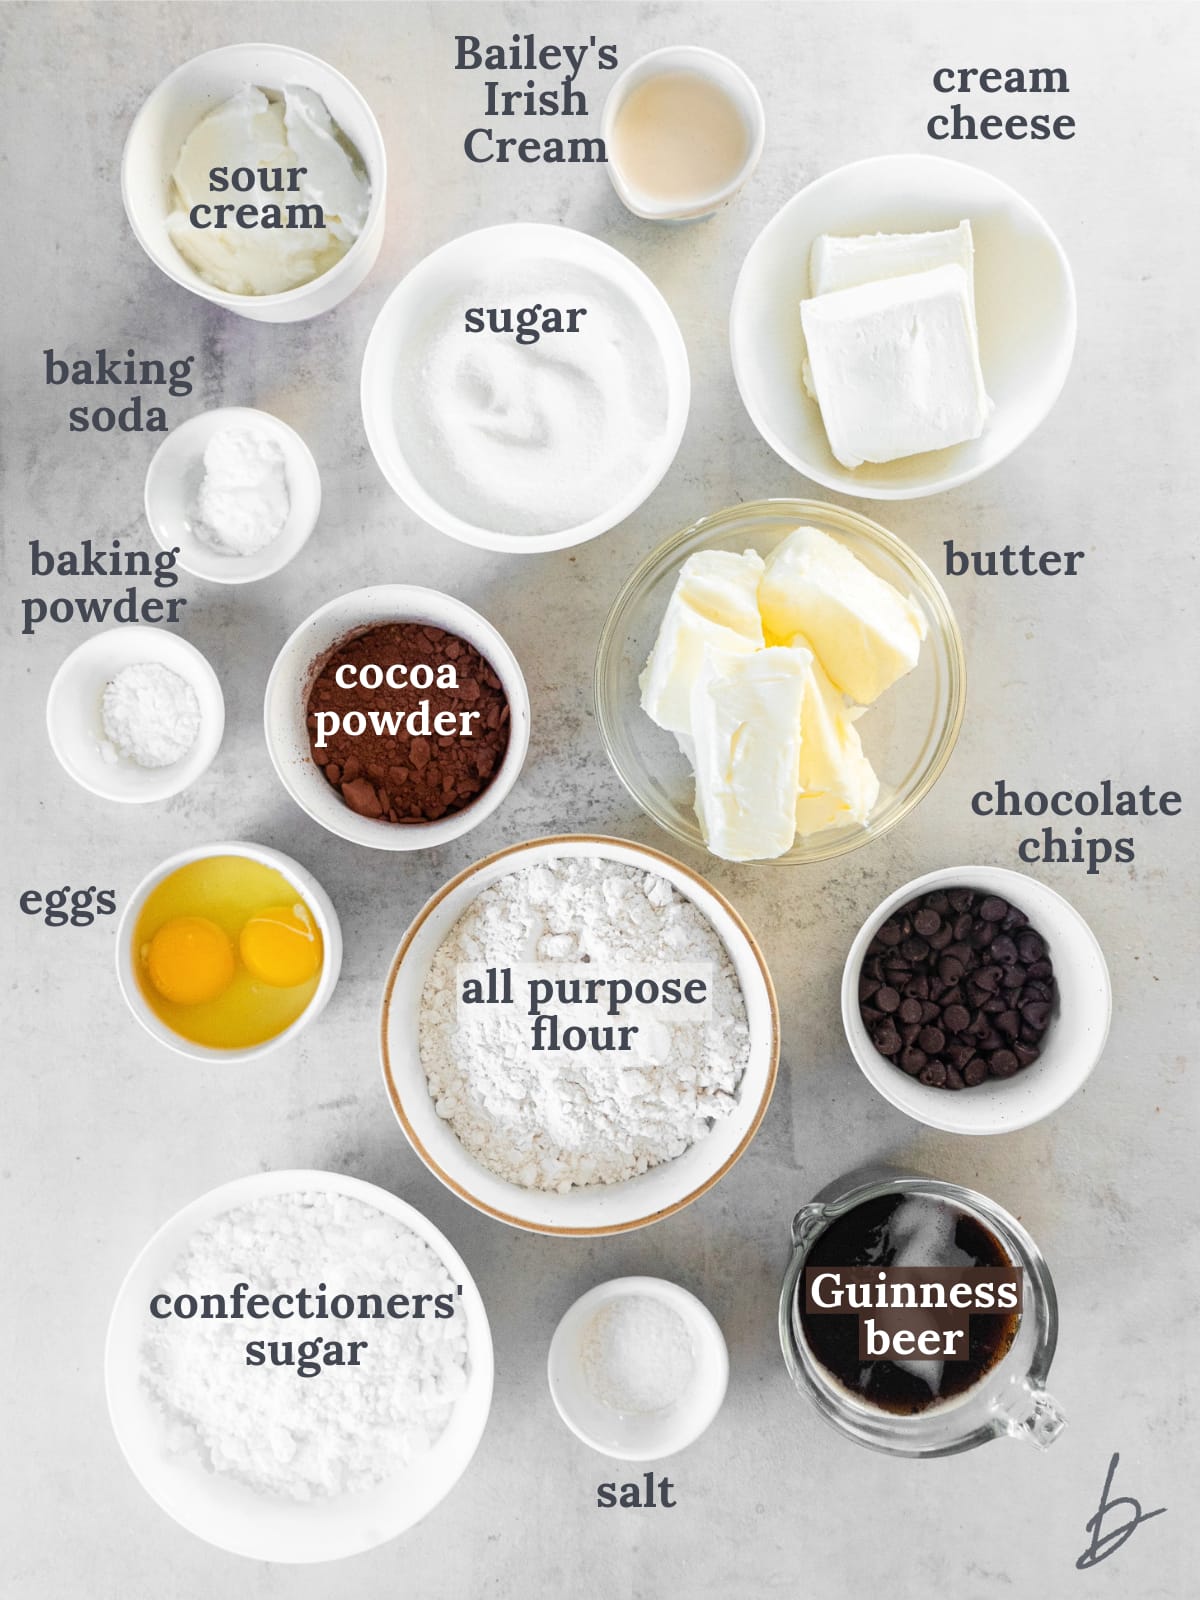 bowls of ingredients to make chocolate guinness cake with bailey's cream cheese frosting.